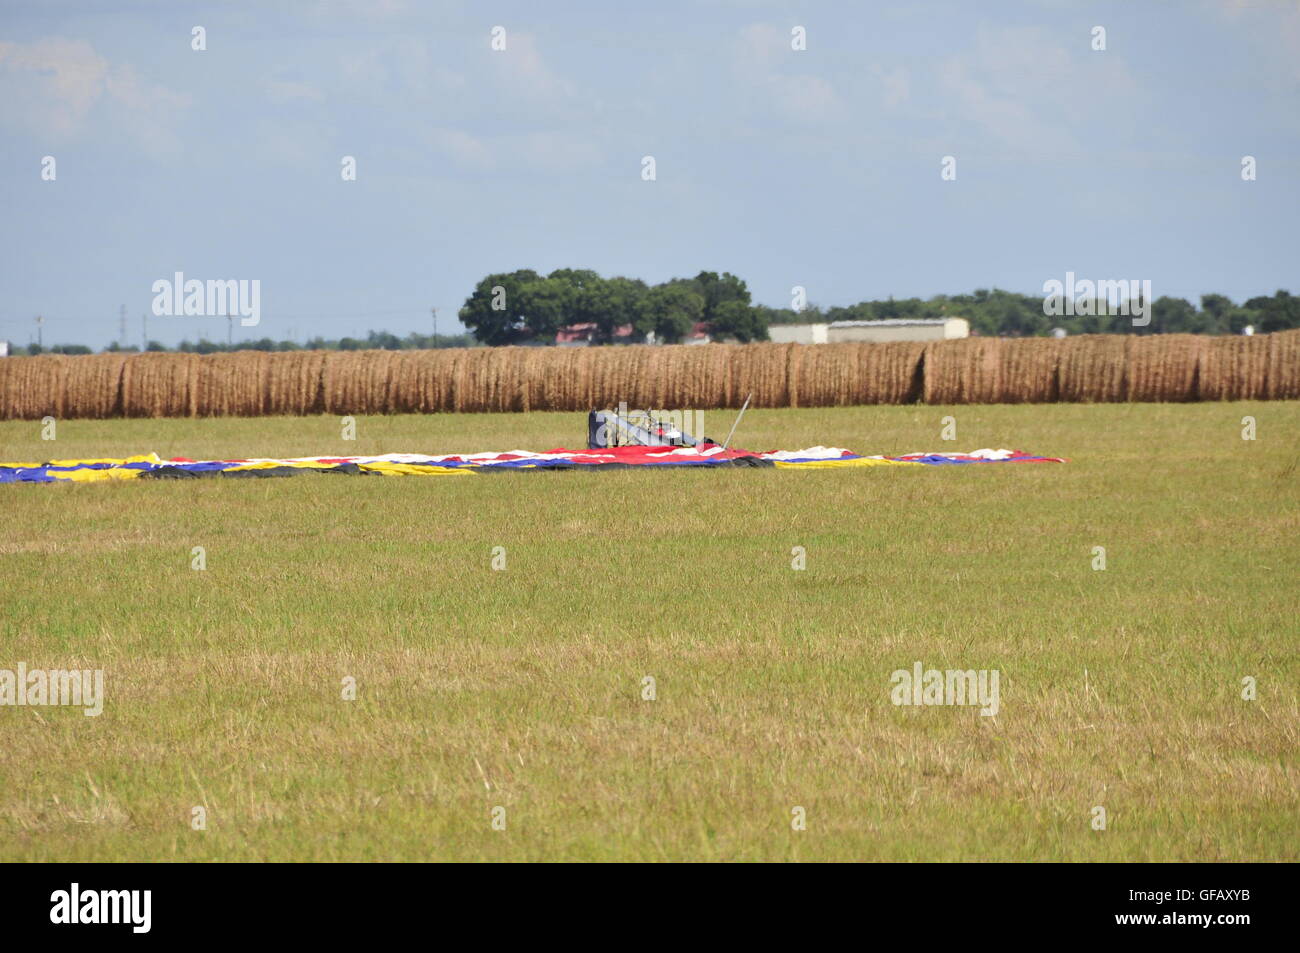 (160731) -- LOCKHART, July 31, 2016 (Xinhua) -- Debris of the balloon is seen at the site of a balloon crash accident near Lockhart, a city in the central part of the U.S. state of Texas, July 30, 2016. U.S. Texas Department of PUBLIC Safety has confirmed that 16 people were killed on Saturday morning after a hot air balloon caught on fire and crashed near Lockhart. The accident occurred shortly after 7:40 a.m. local time on Saturday near Lockhart, when the hot air balloon with at least 16 people on board crashed into a pasture, the Federal Aviation Administration (FAA) said in a statement on Stock Photo